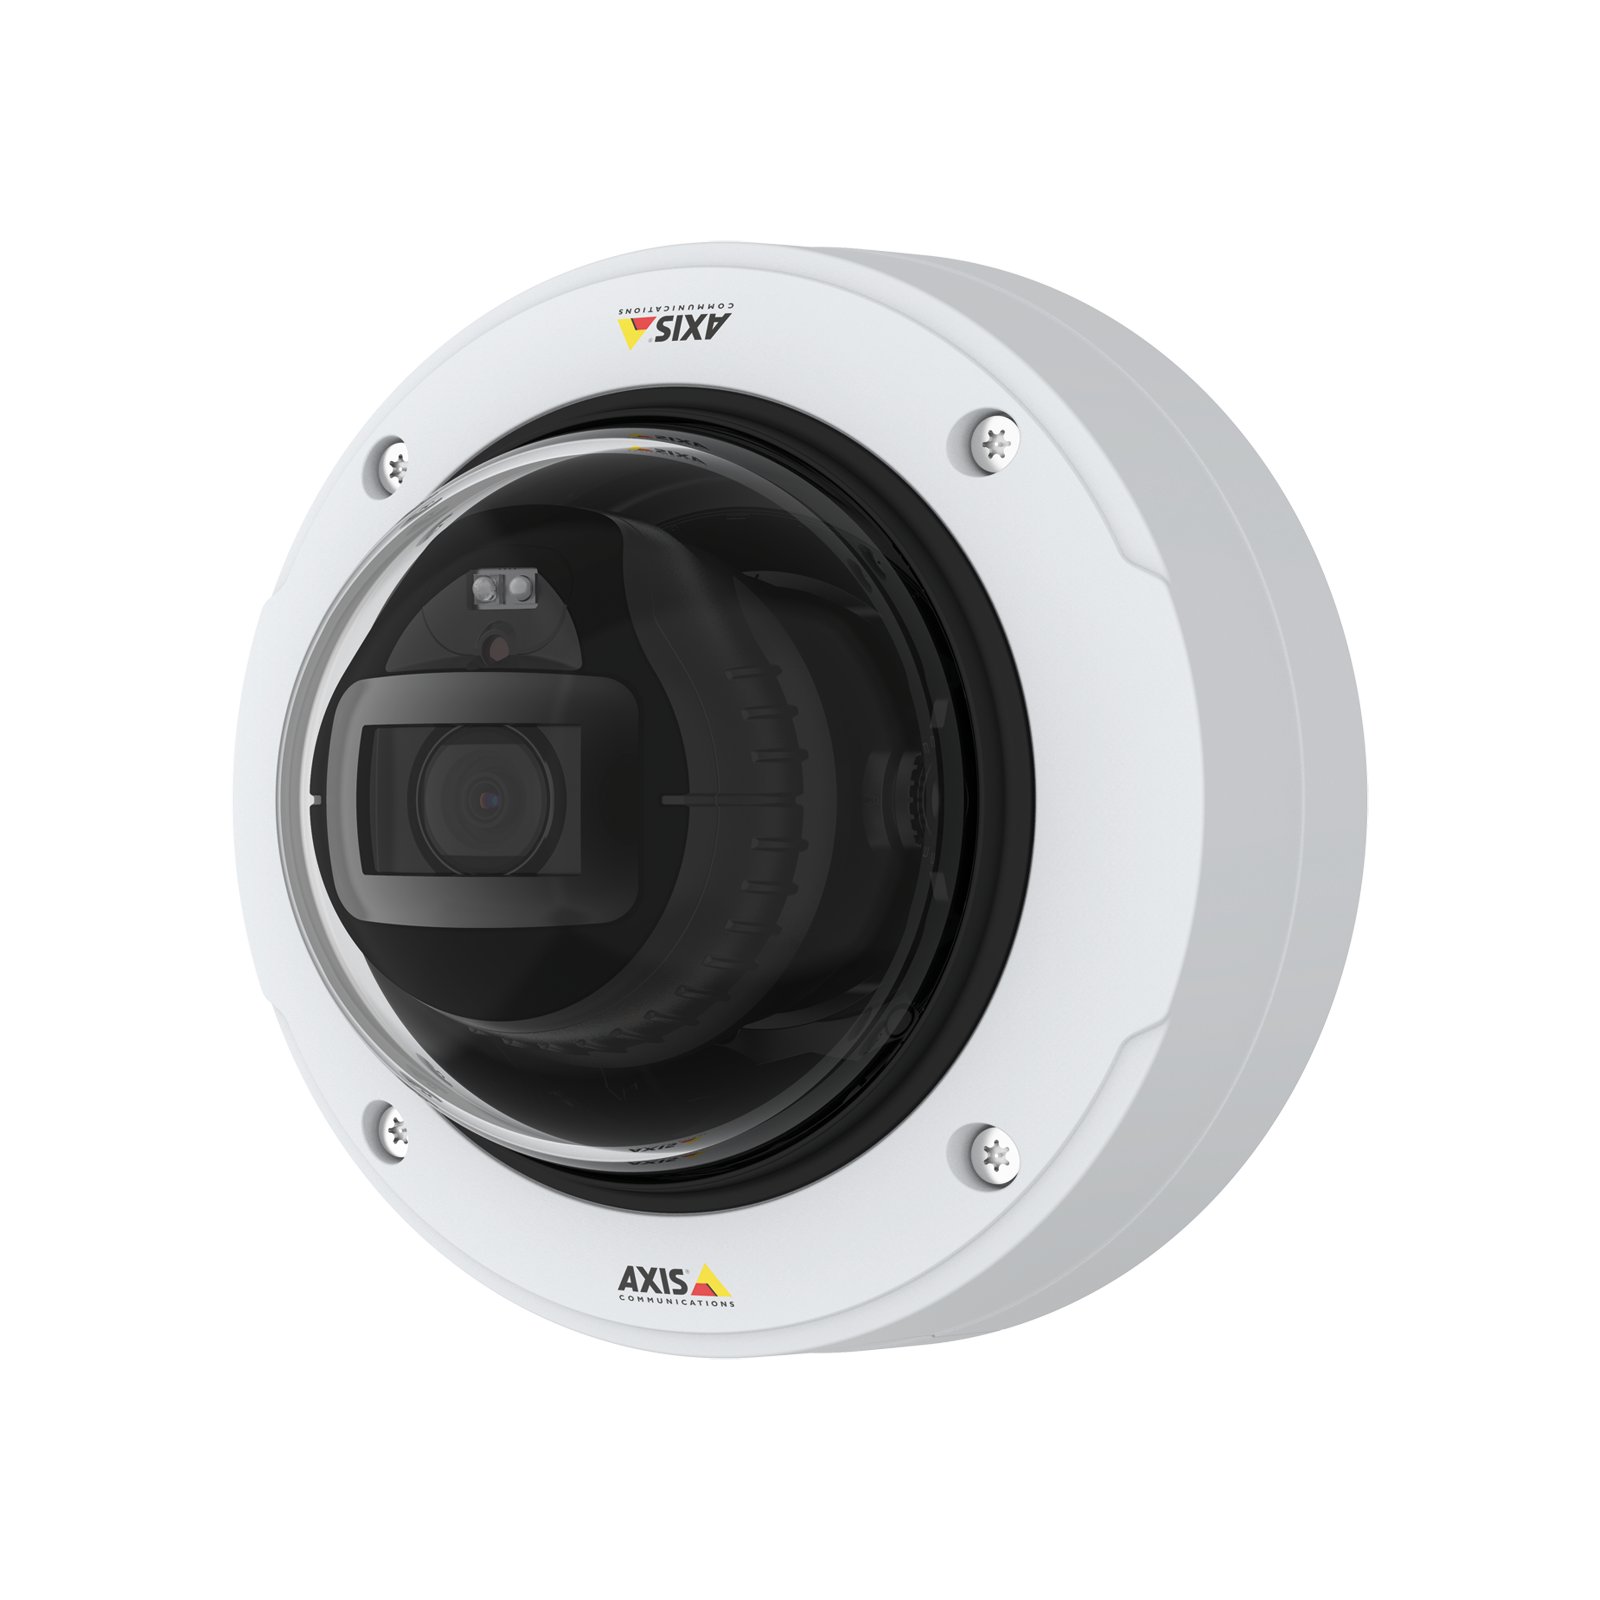 Axis P32 Series Fixed Dome Cameras